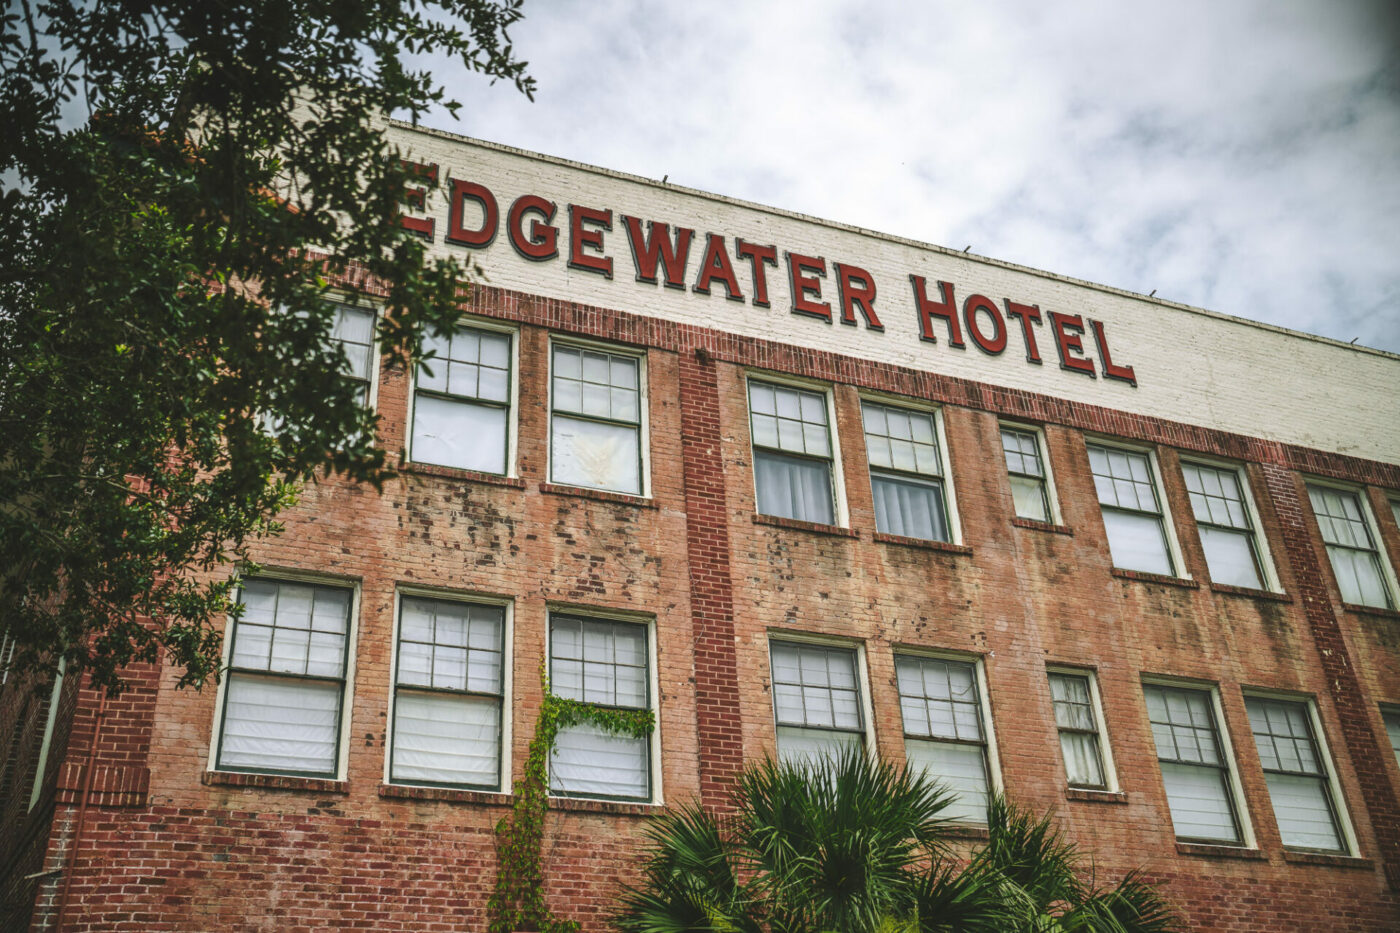 Edgewater Hotel, where to stay in Winter Garden